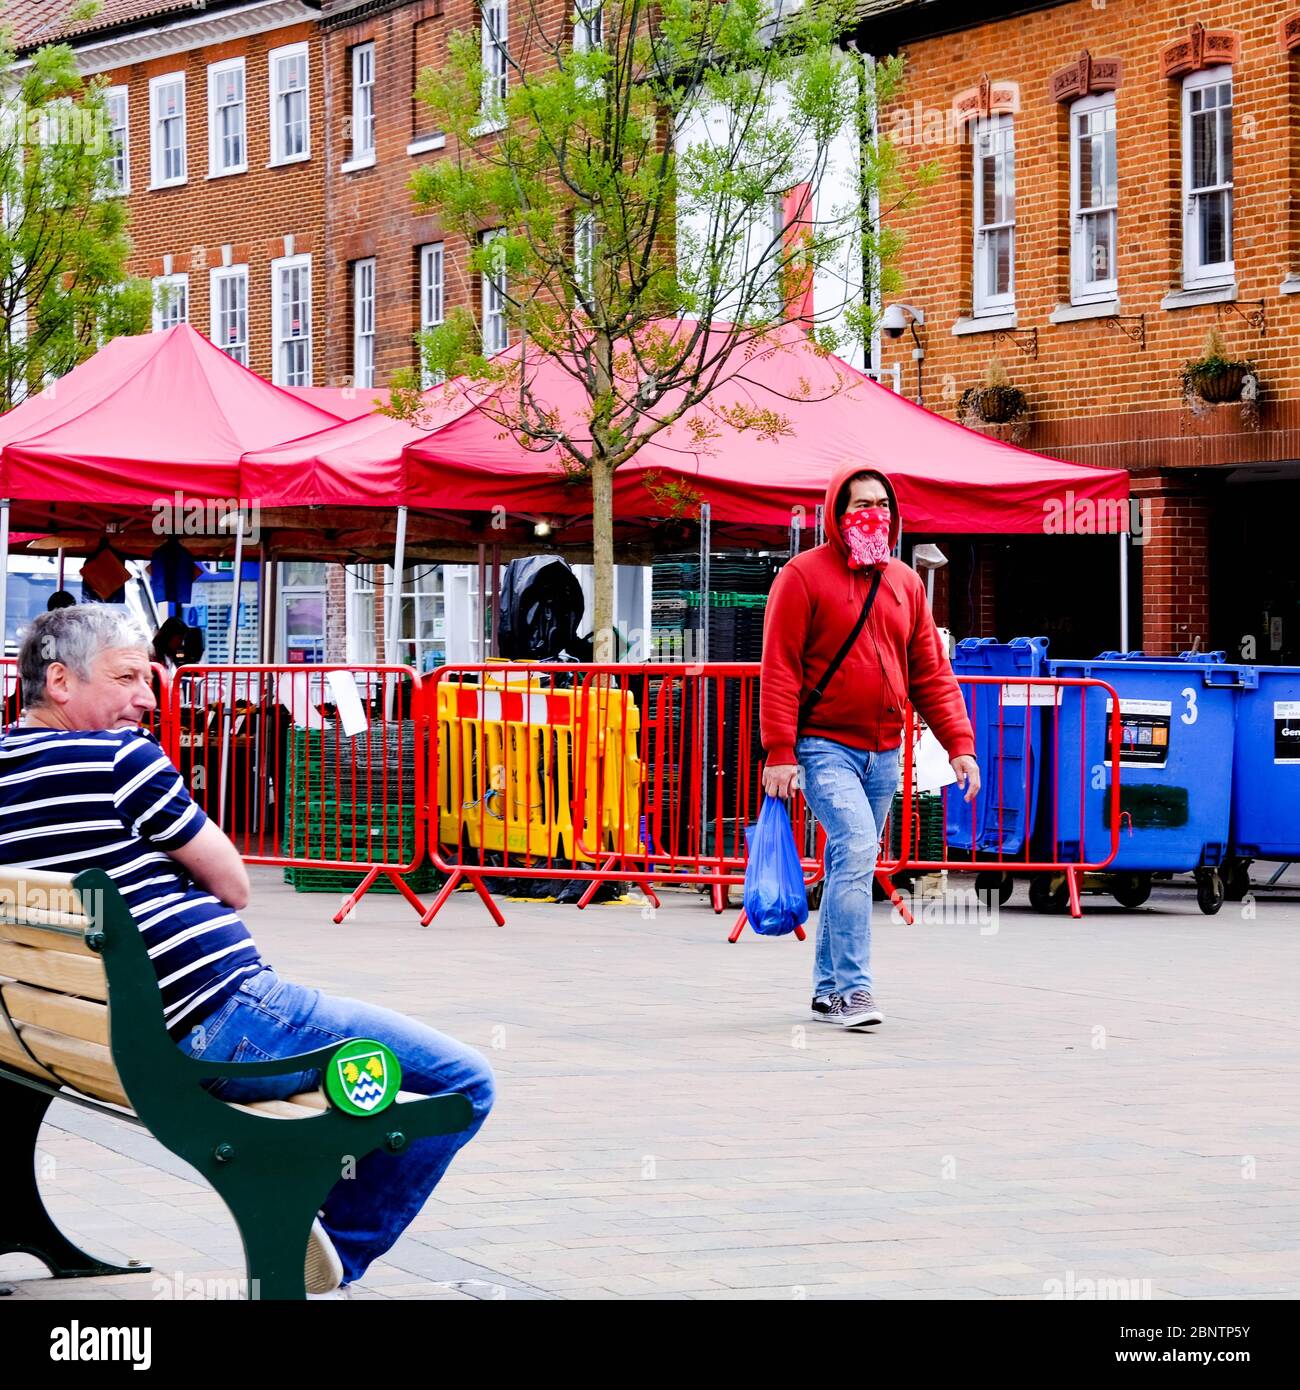 A Pedestrian Walking With Shopping Wearing A Homemade Protective Face Mask Passing A Man On A Bench With No Protection Stock Photo